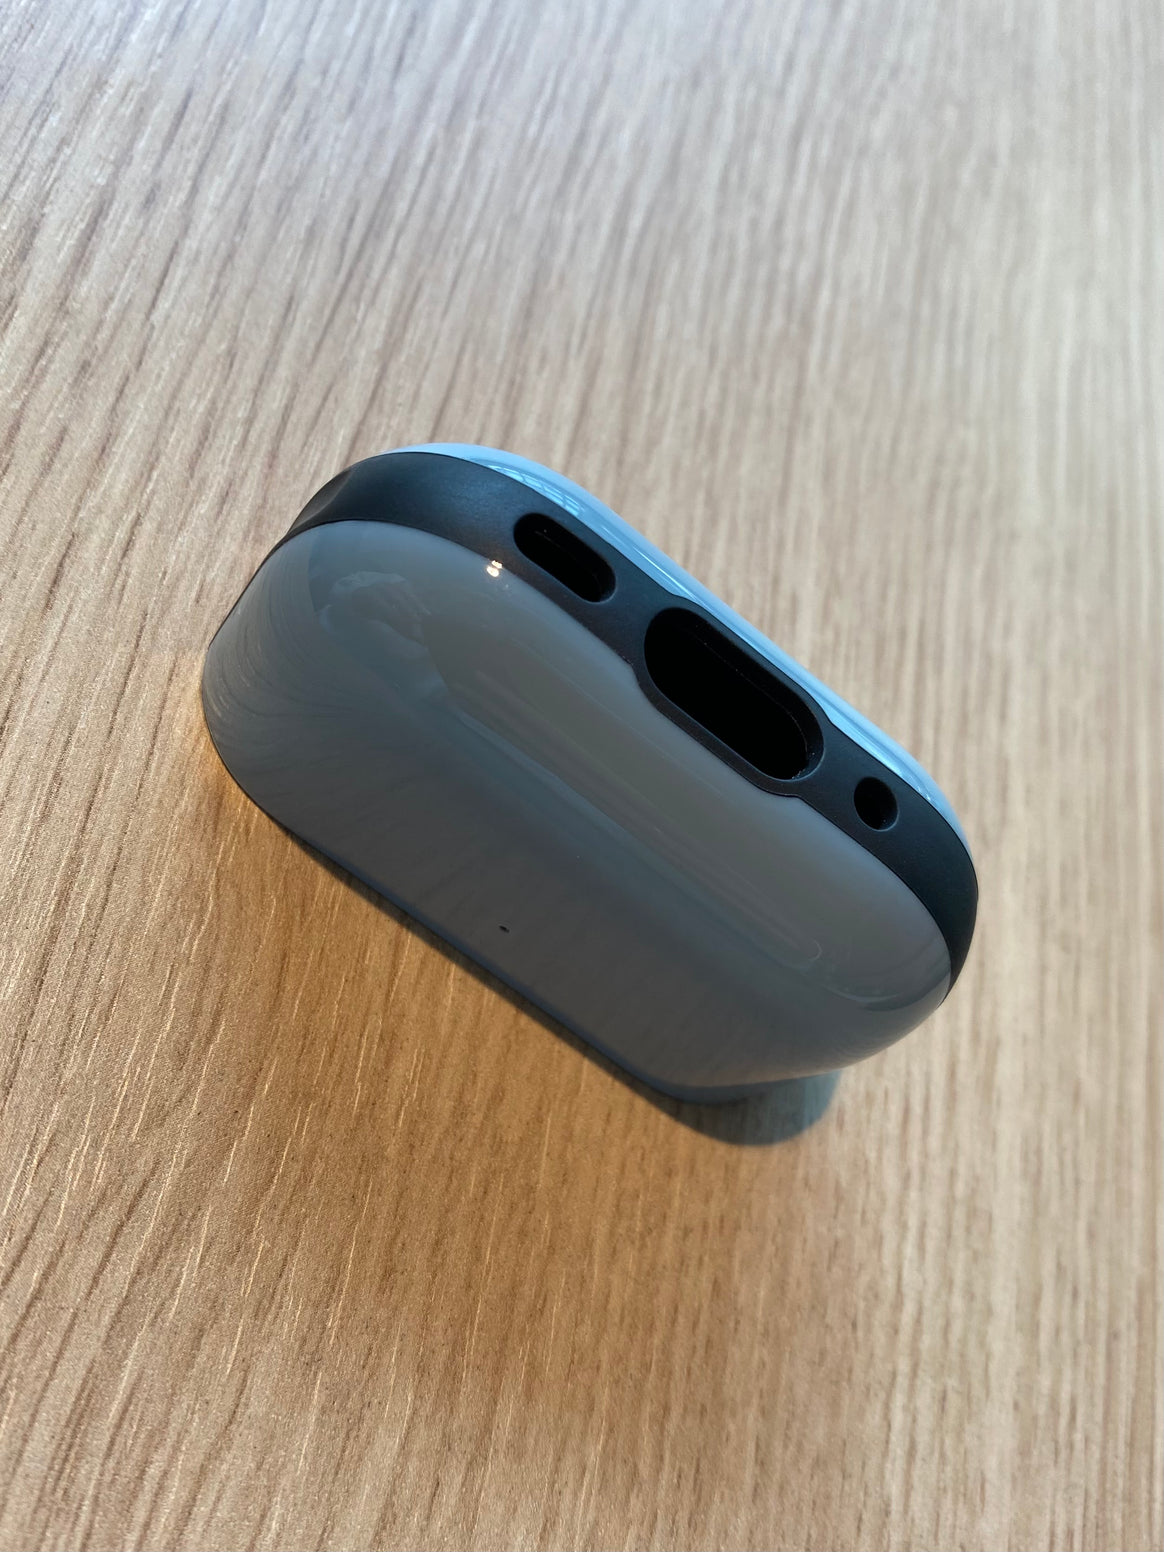 Nomad Sport Case for AirPods Pro (2nd Gen) - Marine Blue - Open Box